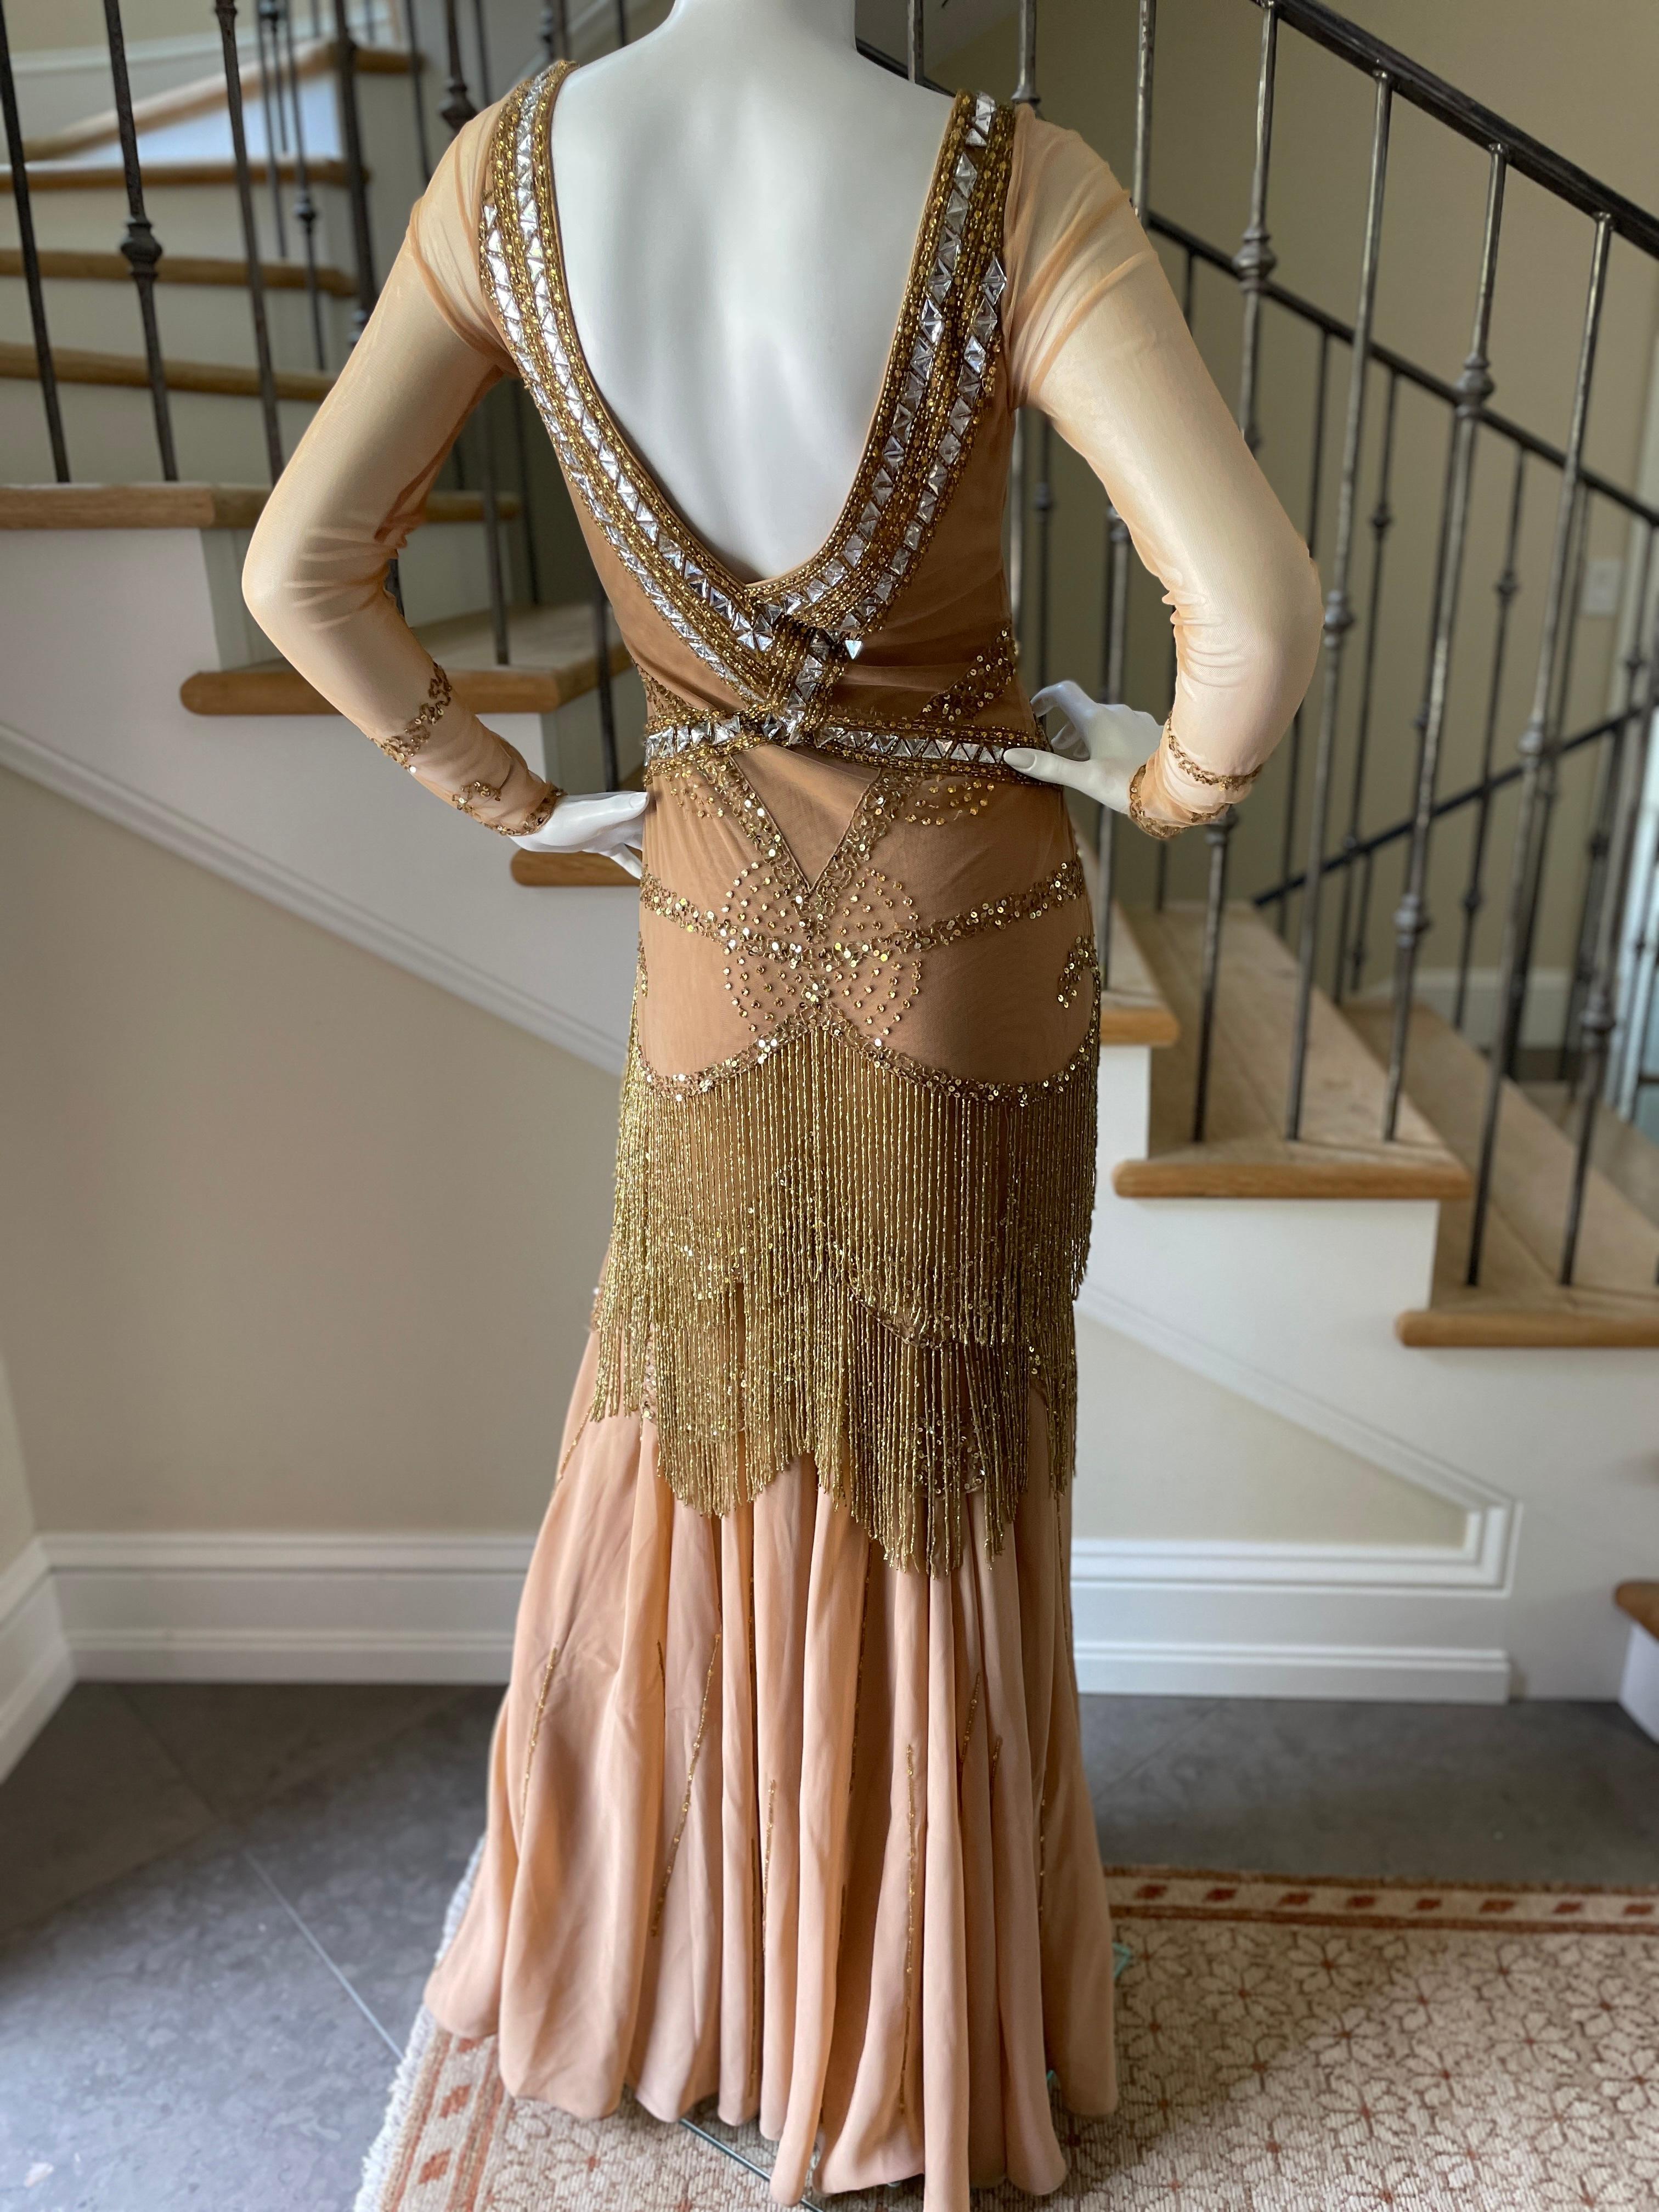 Class Cavalli Extravagantly Jeweled Vintage Evening Dress with Beaded Fringe For Sale 5